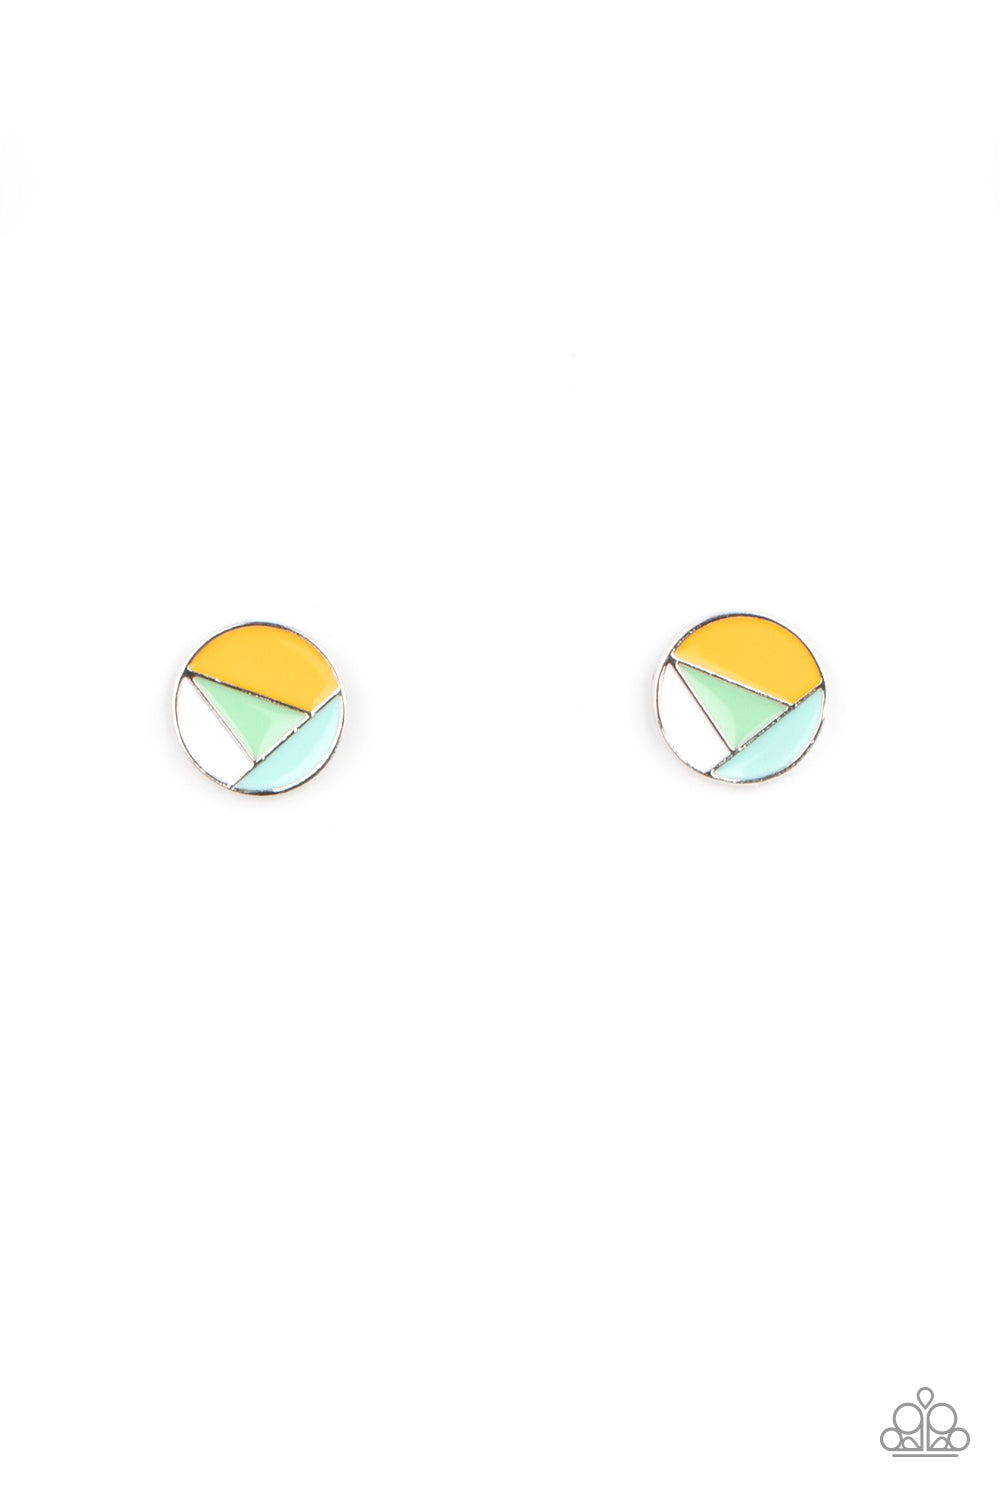 Artistic Expression Multi Post Earring - Paparazzi Accessories. A dainty round frame is painted in Green Ash, Cerulean, Marigold, and white geometric sections, creating an abstract display. Earring attaches to a standard post fitting.  All Paparazzi Accessories are lead free and nickel free!  Sold as one pair of post earrings.